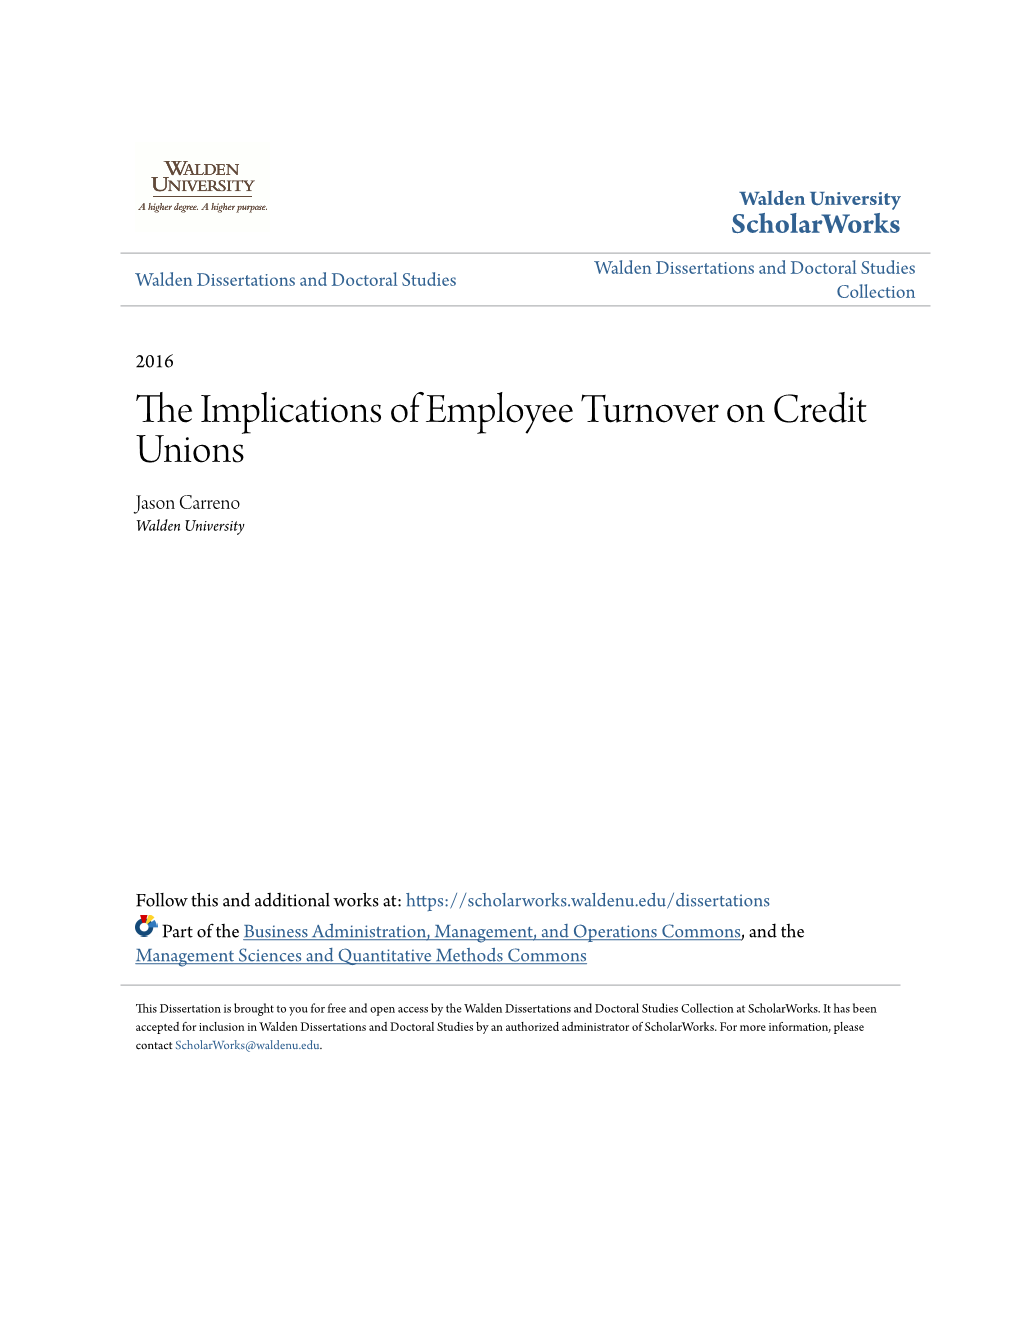 The Implications of Employee Turnover on Credit Unions